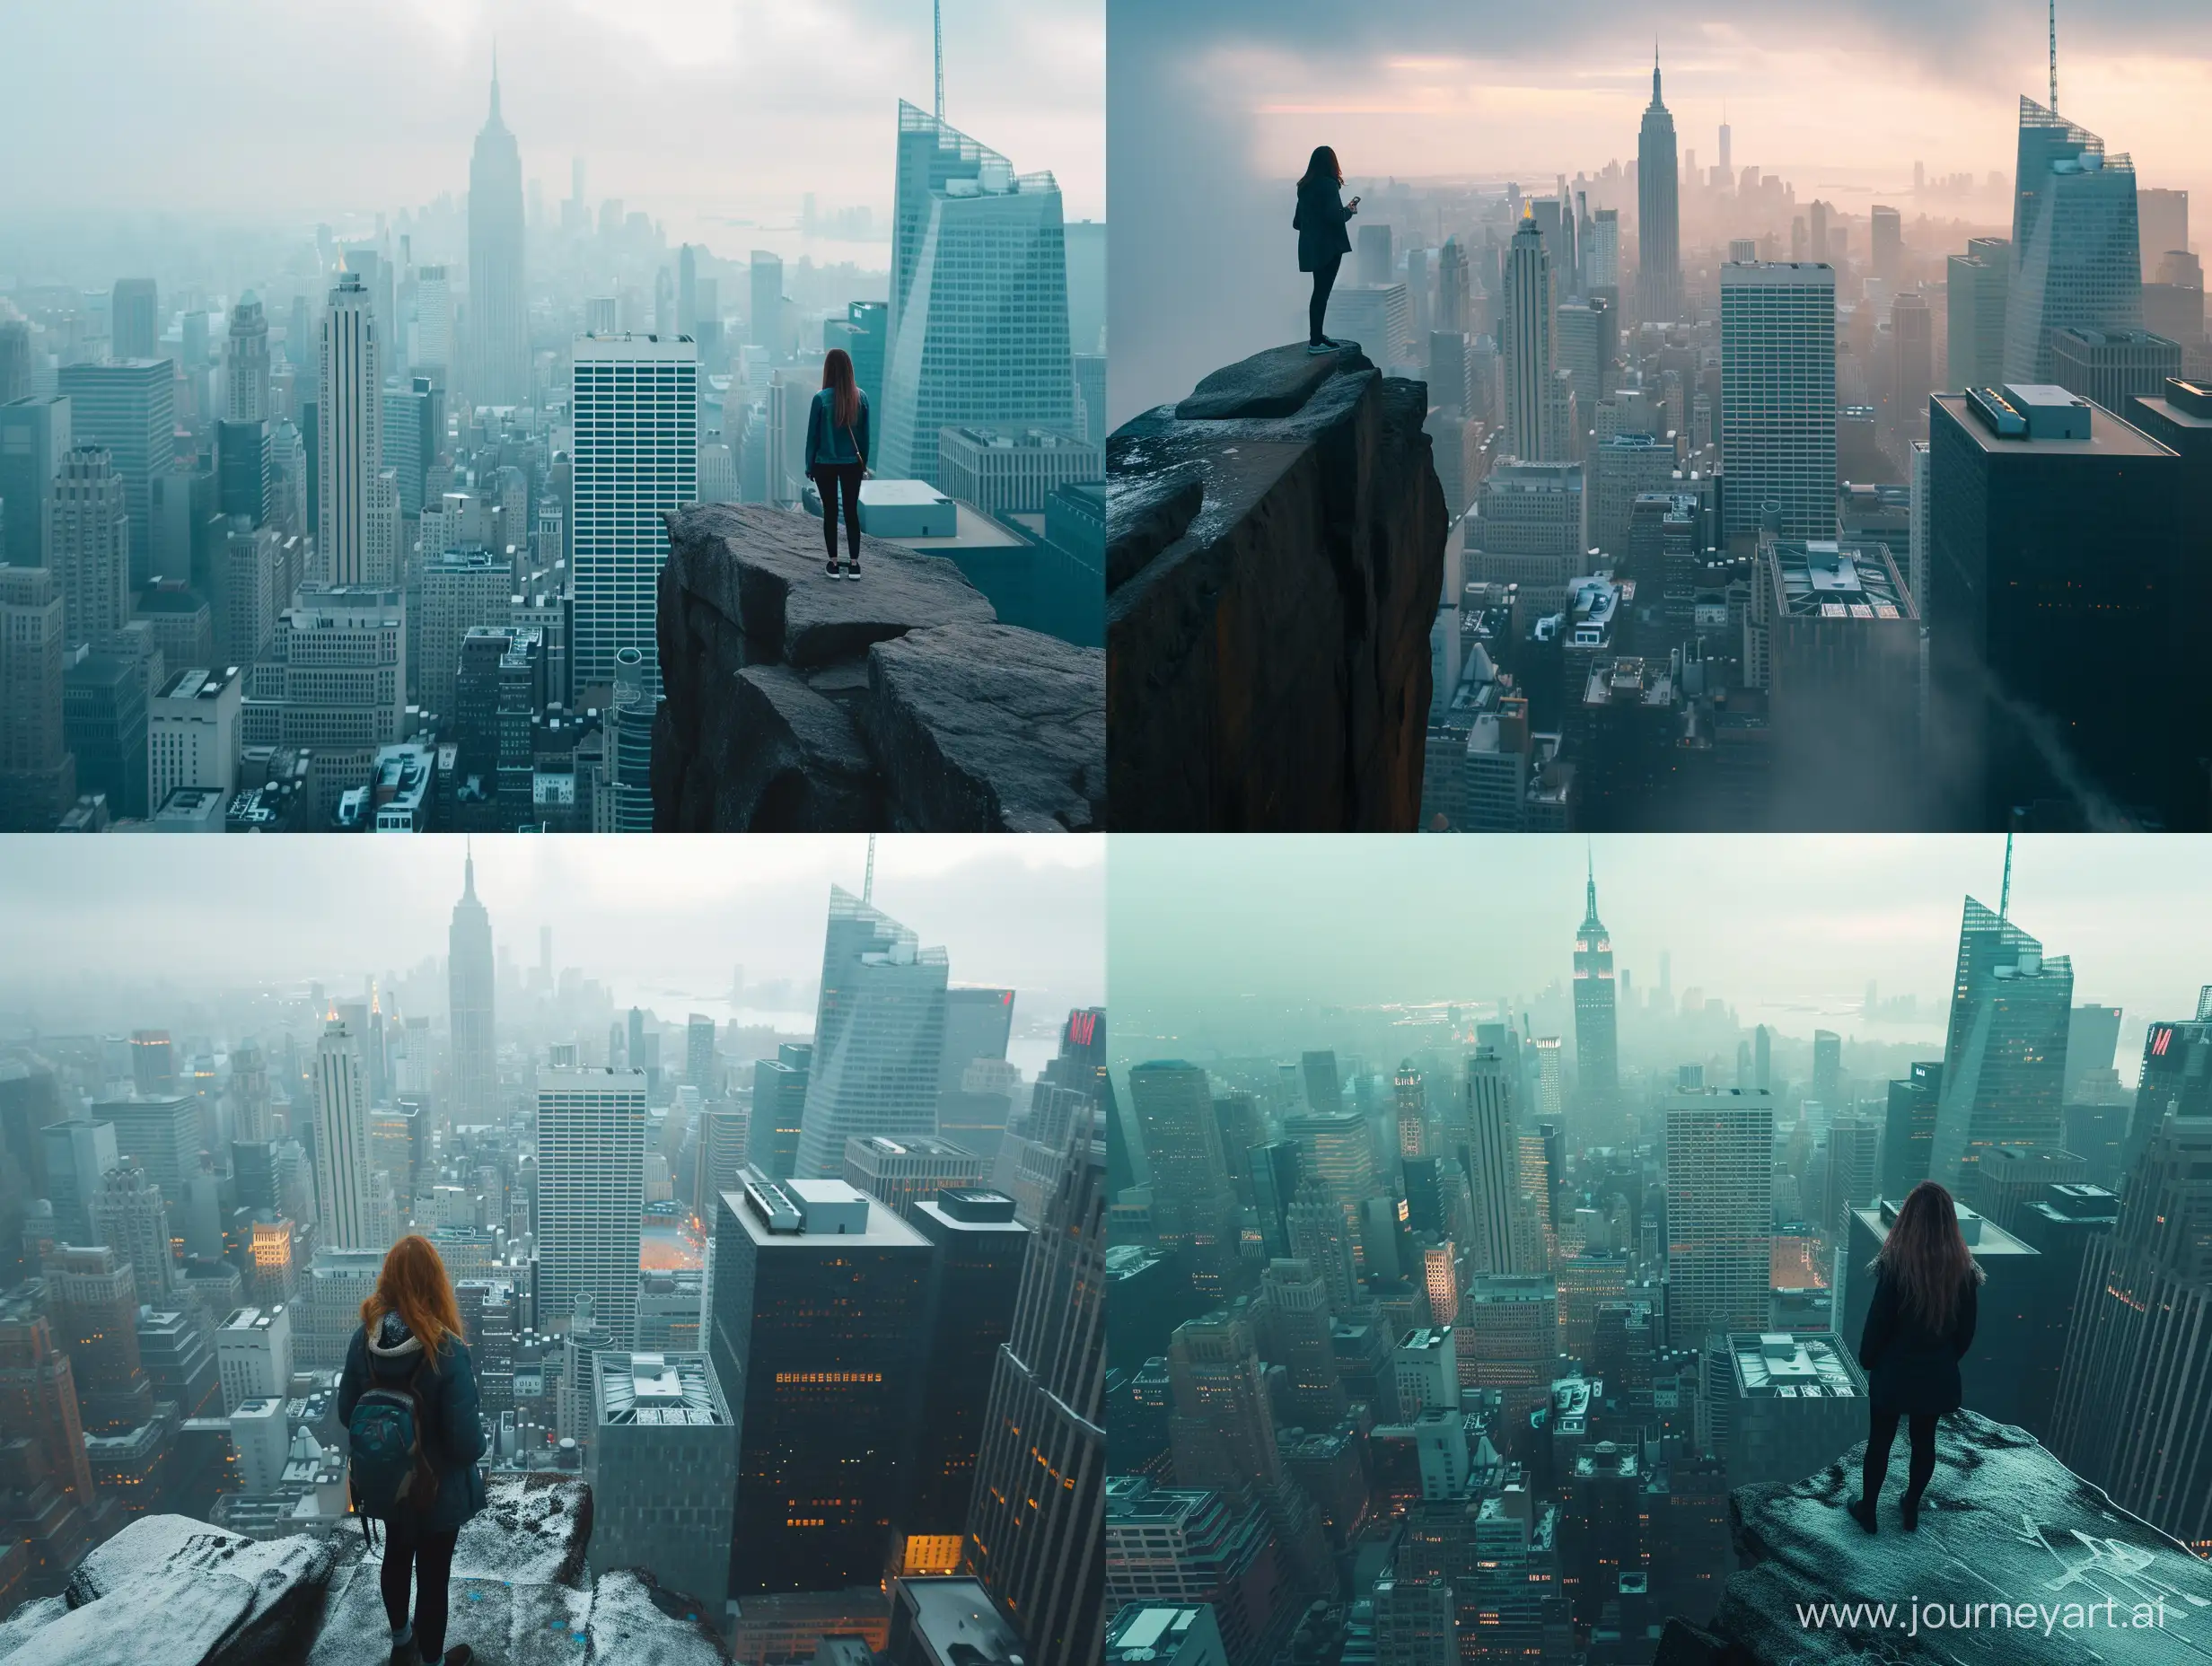 a bustling new new york city, the photo is bathed in natural lighting, relaxing setting. Shot in 4k with a high end DSLR camera. such as a Canon EOS R5 with a 50mm f/1. 2 lens, architecture, drone view, skyline, a woman is standing on the edge of a cliff while looking at new york city, vivid, foggy, dystopian, science fiction
